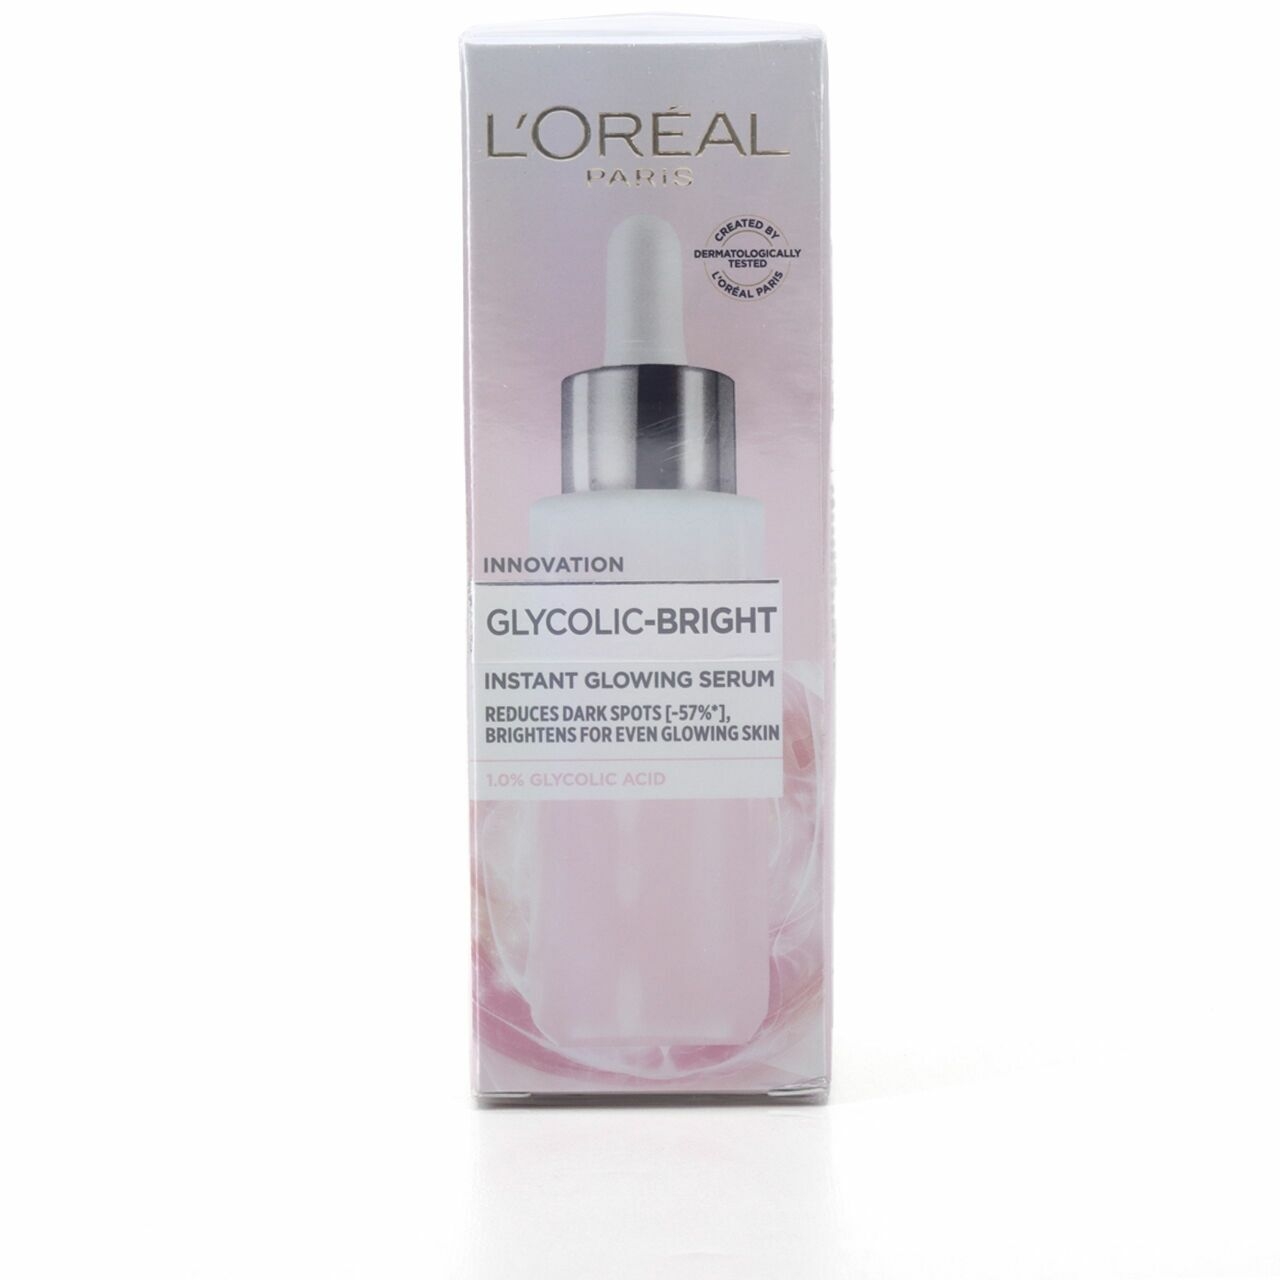 L'Oreal Paris Glycolic Bright Instant Glowing Face Serum Skin Care